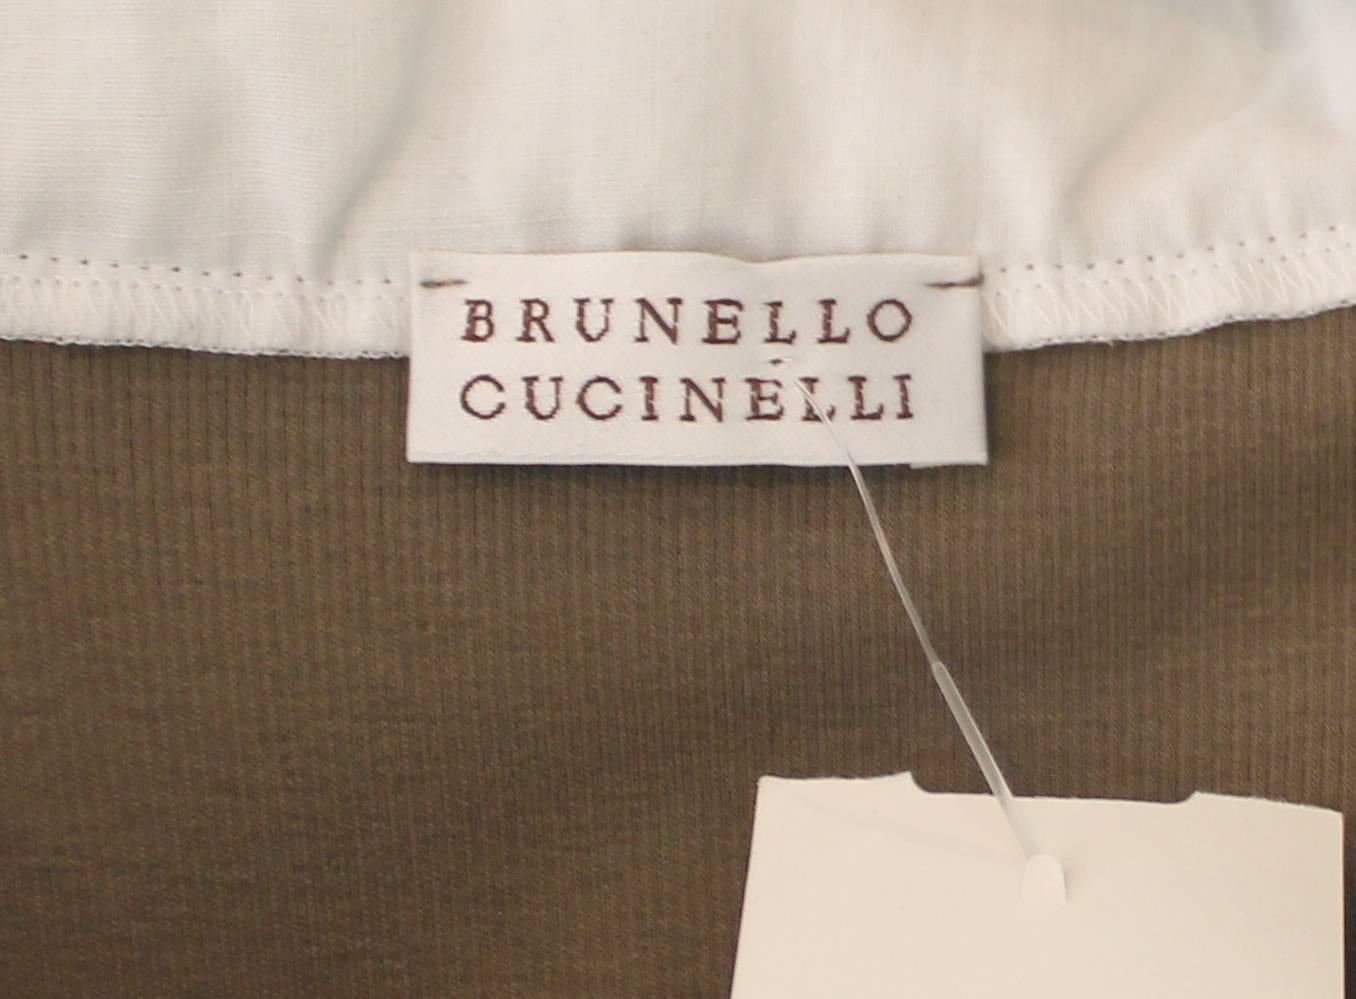 Women's Brunello Cucinelli Olive and White Cotton Blend Sleeveless Top - L.